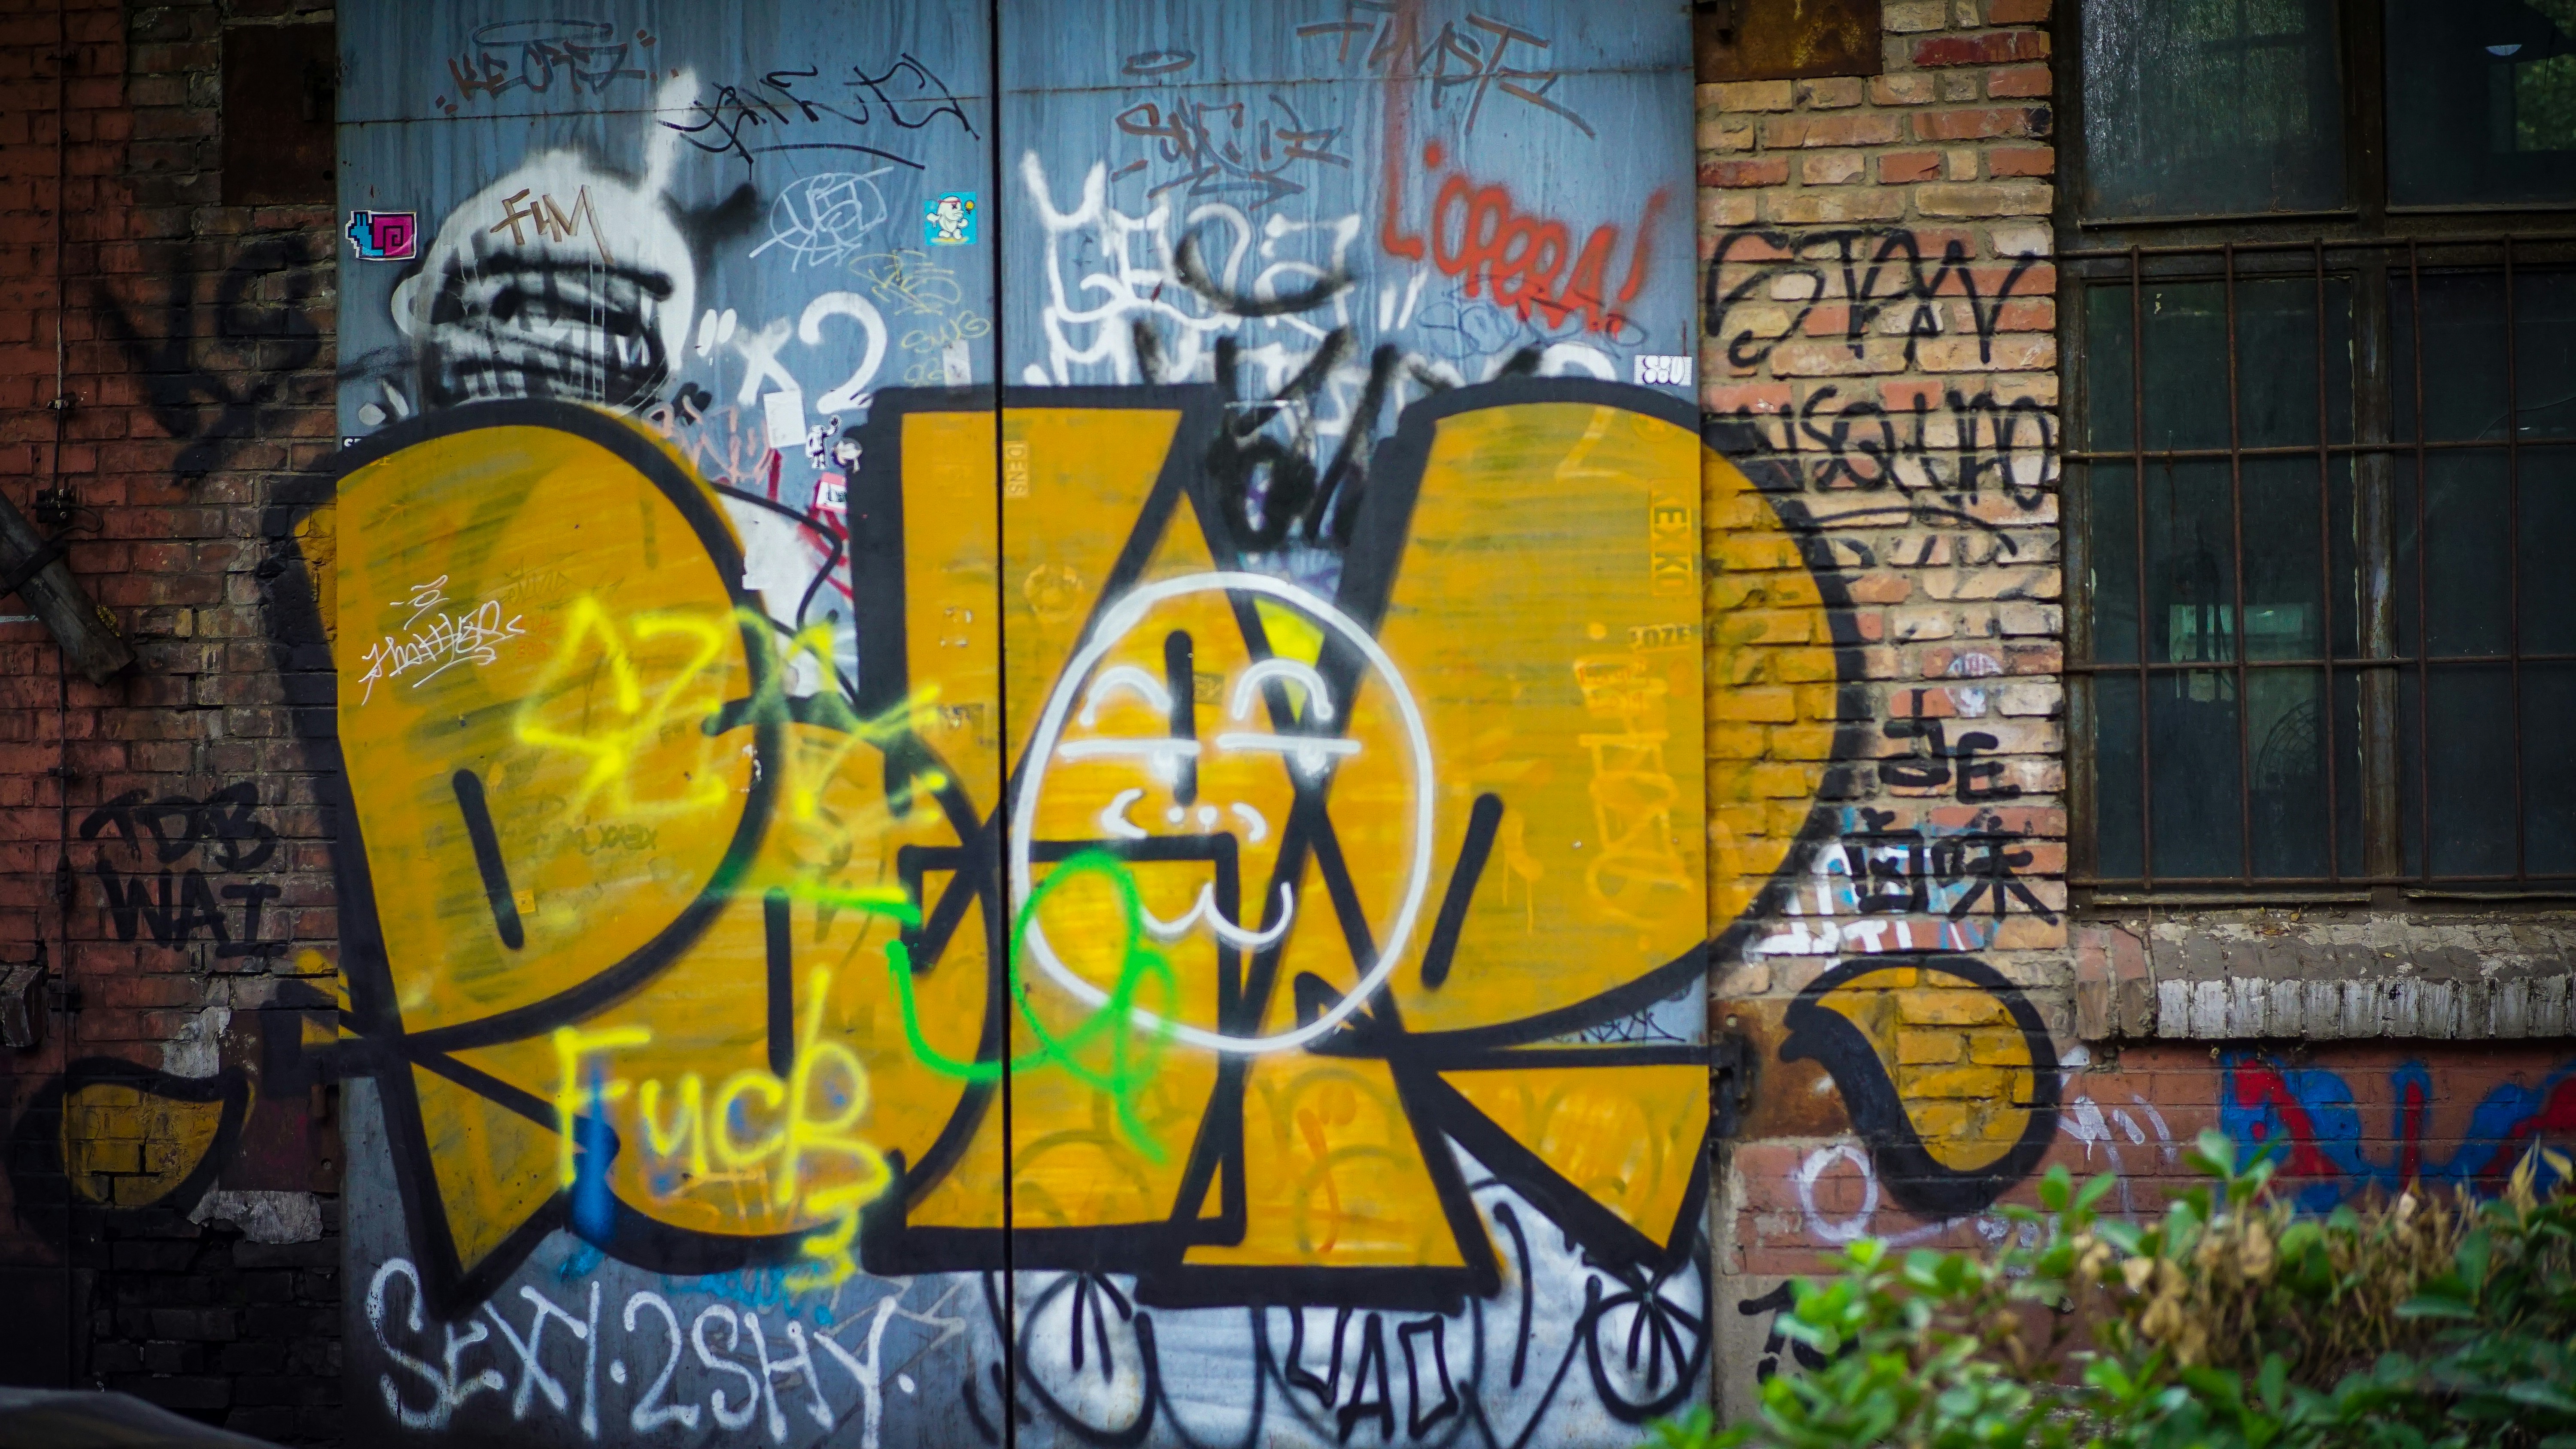 Grafitti is the art of the streets, and now you can bring it to your mobile or desktop with a super dope graffiti wallpaper. 100% free on Unsplash.